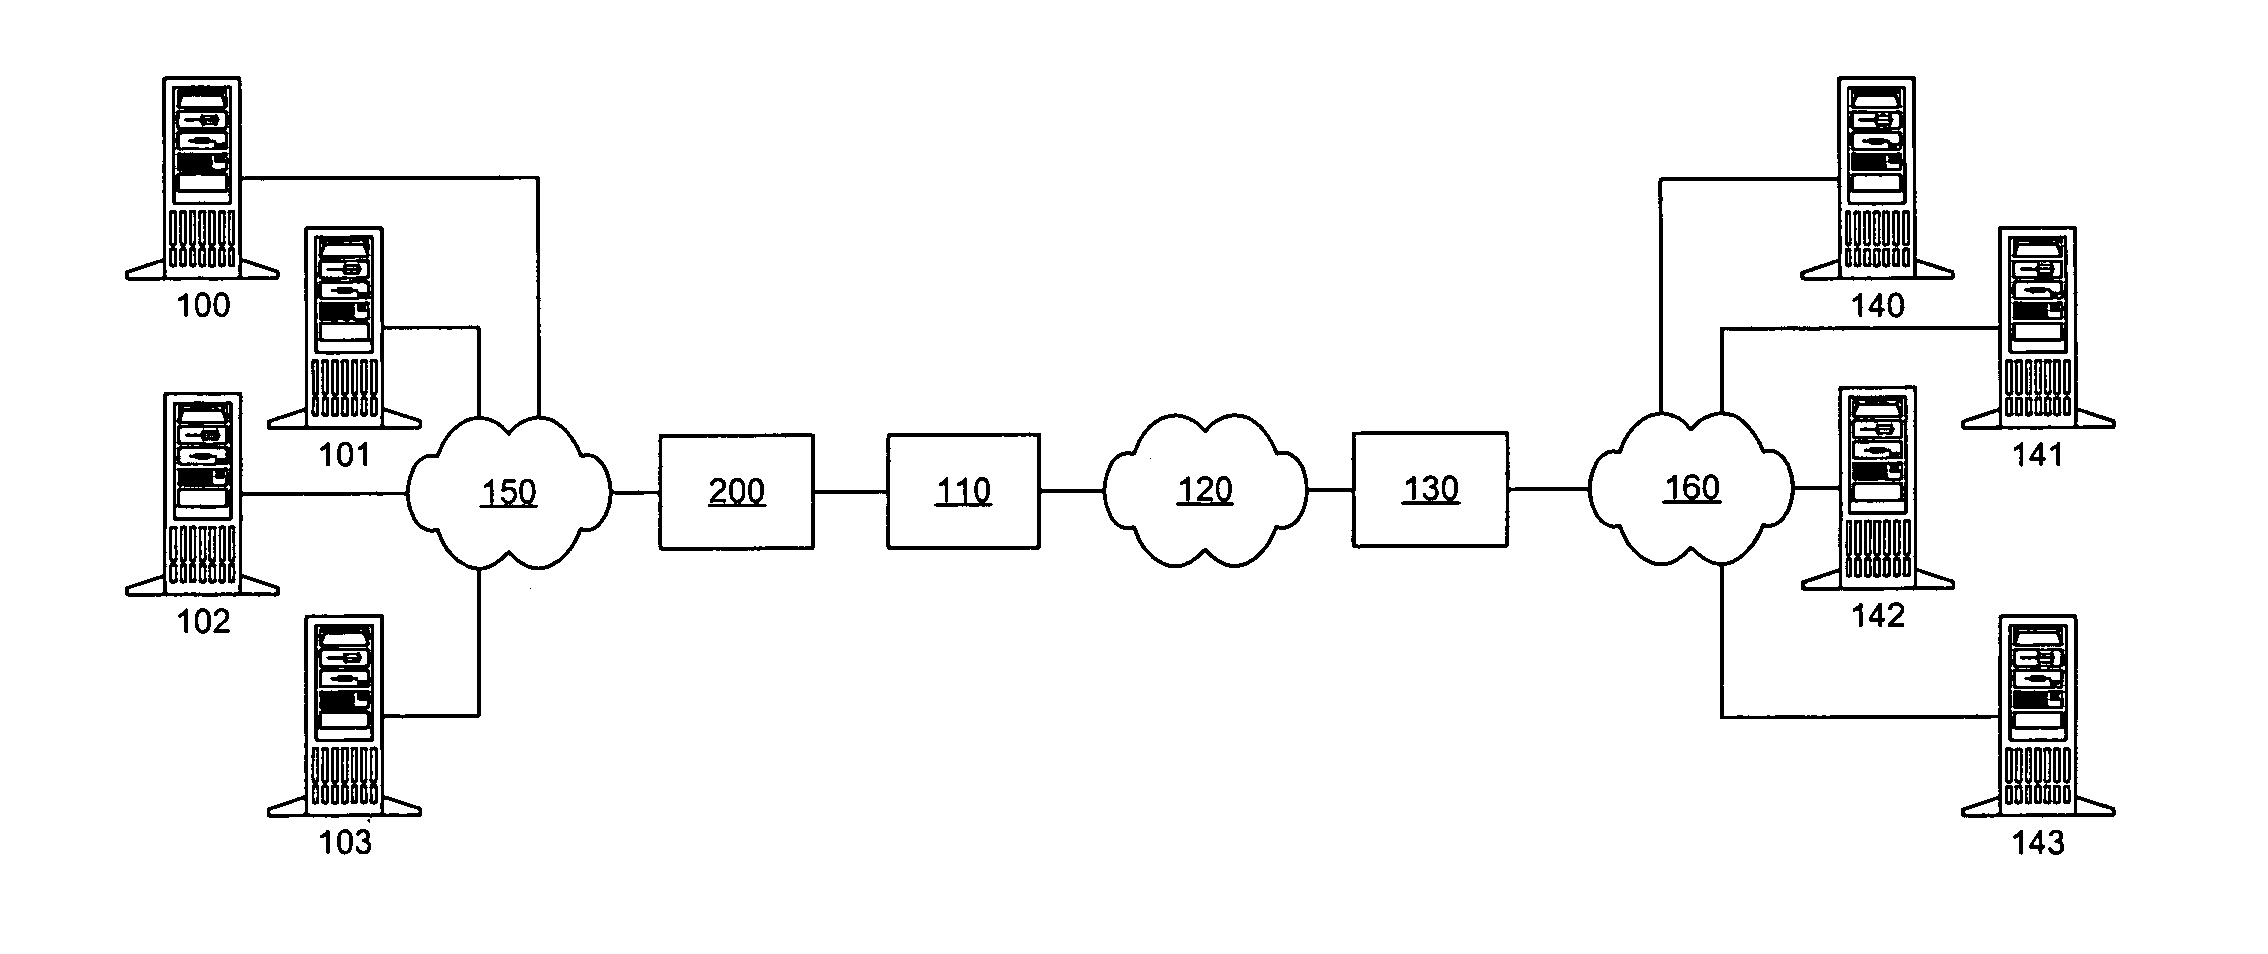 Transaction boundary detection for reduction in timeout penalties